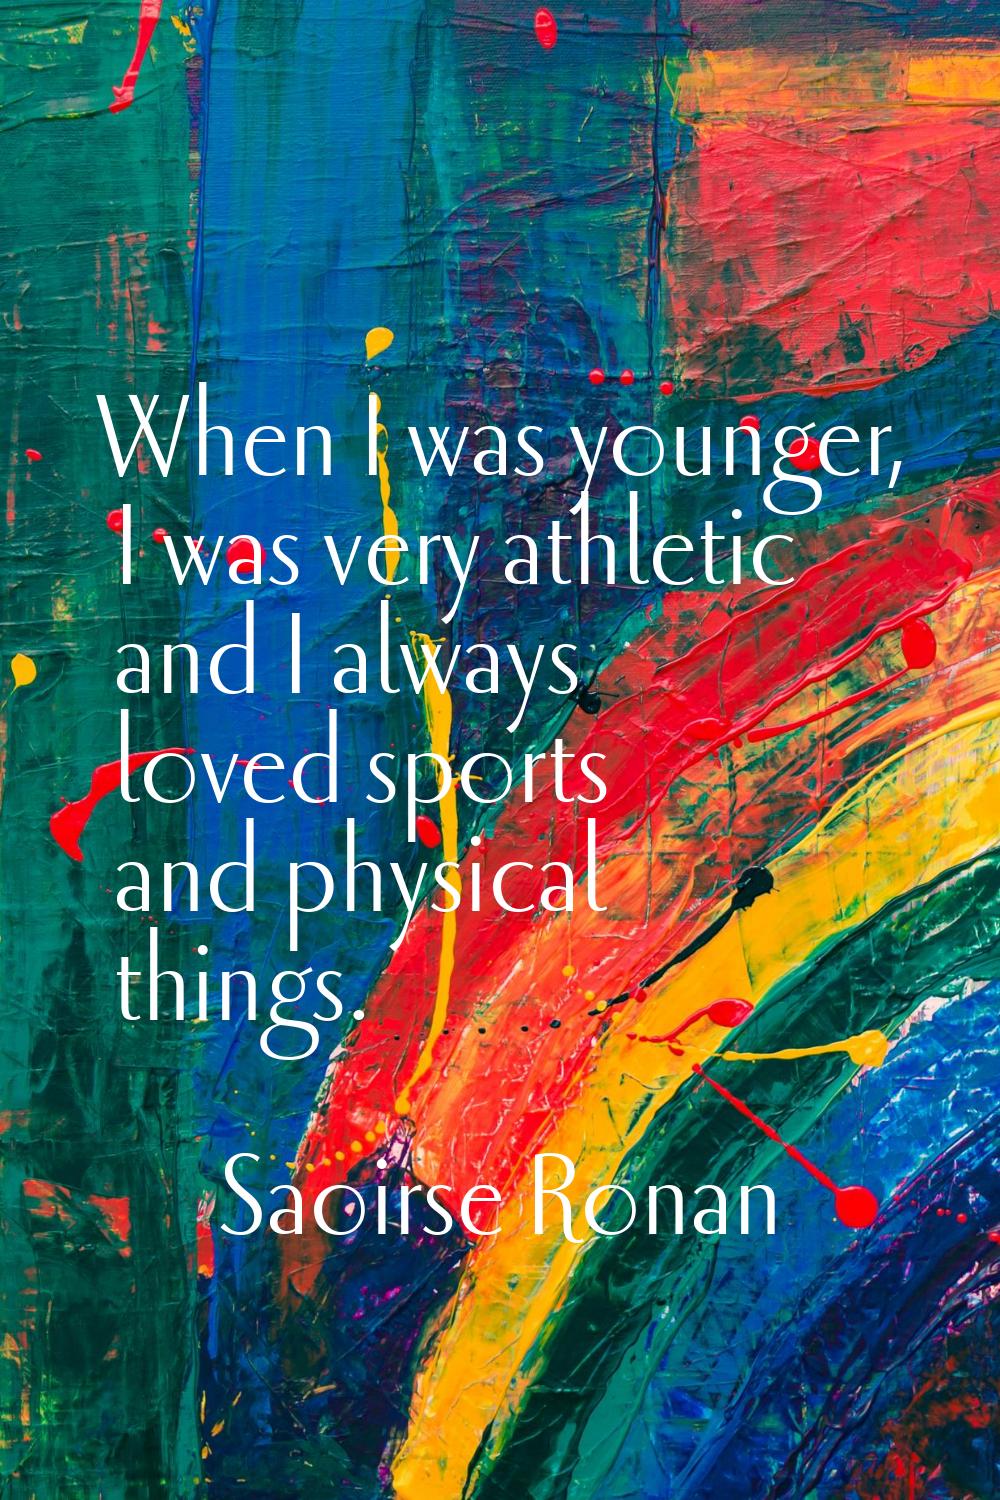 When I was younger, I was very athletic and I always loved sports and physical things.